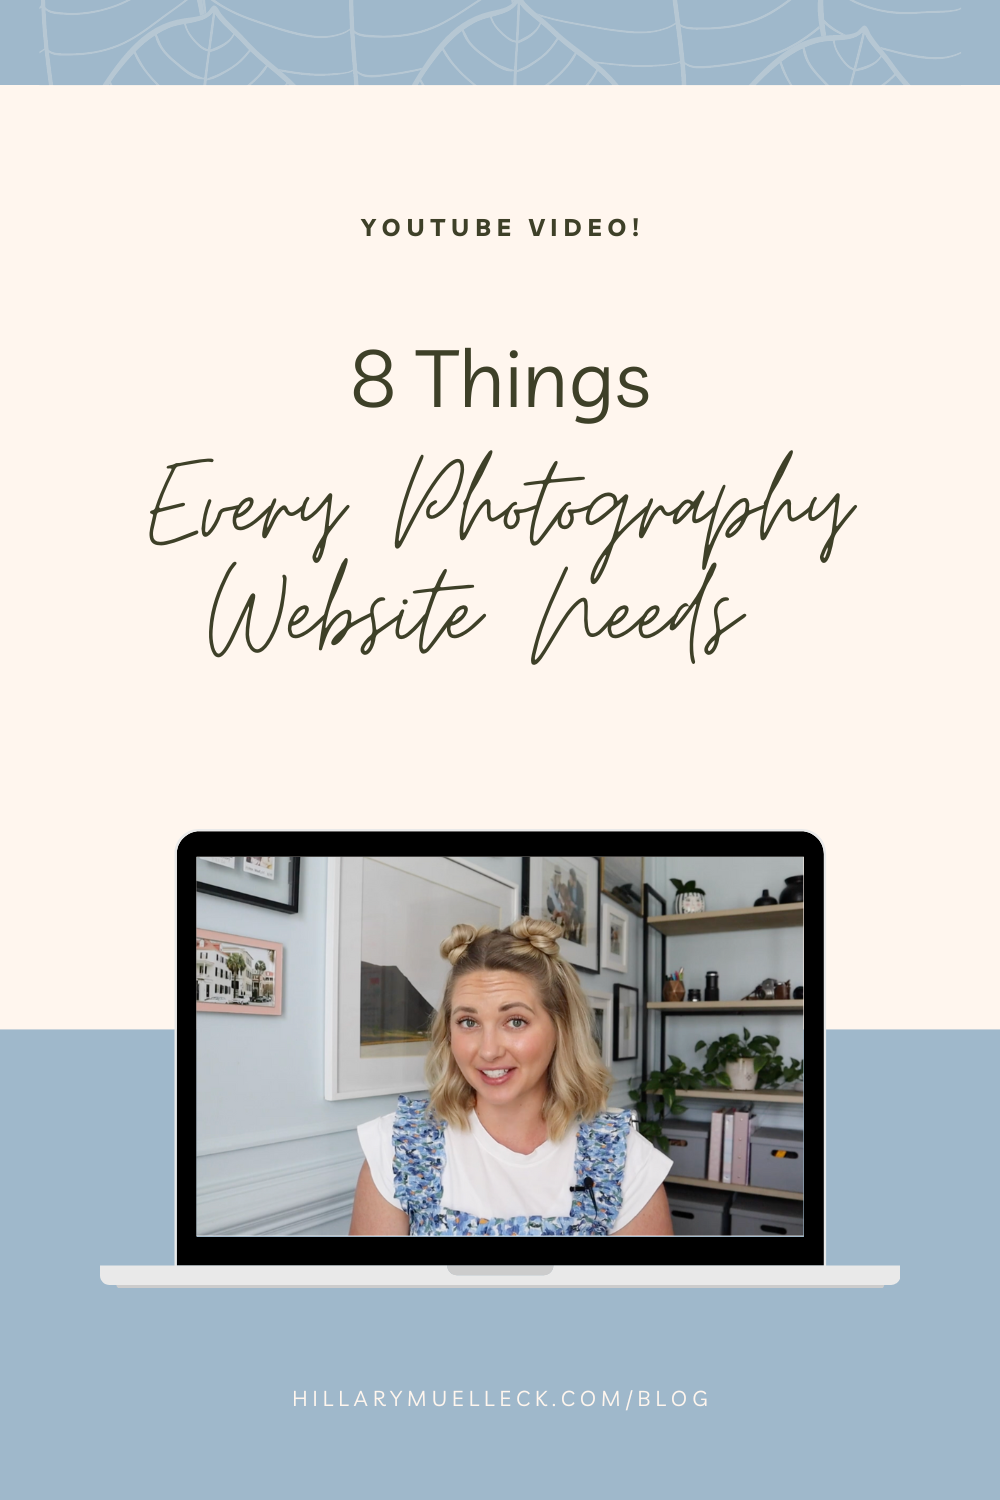 8 things every website needs to be user-friendly and easy to book, shared by wedding photographer and educator Hillary Mulleck